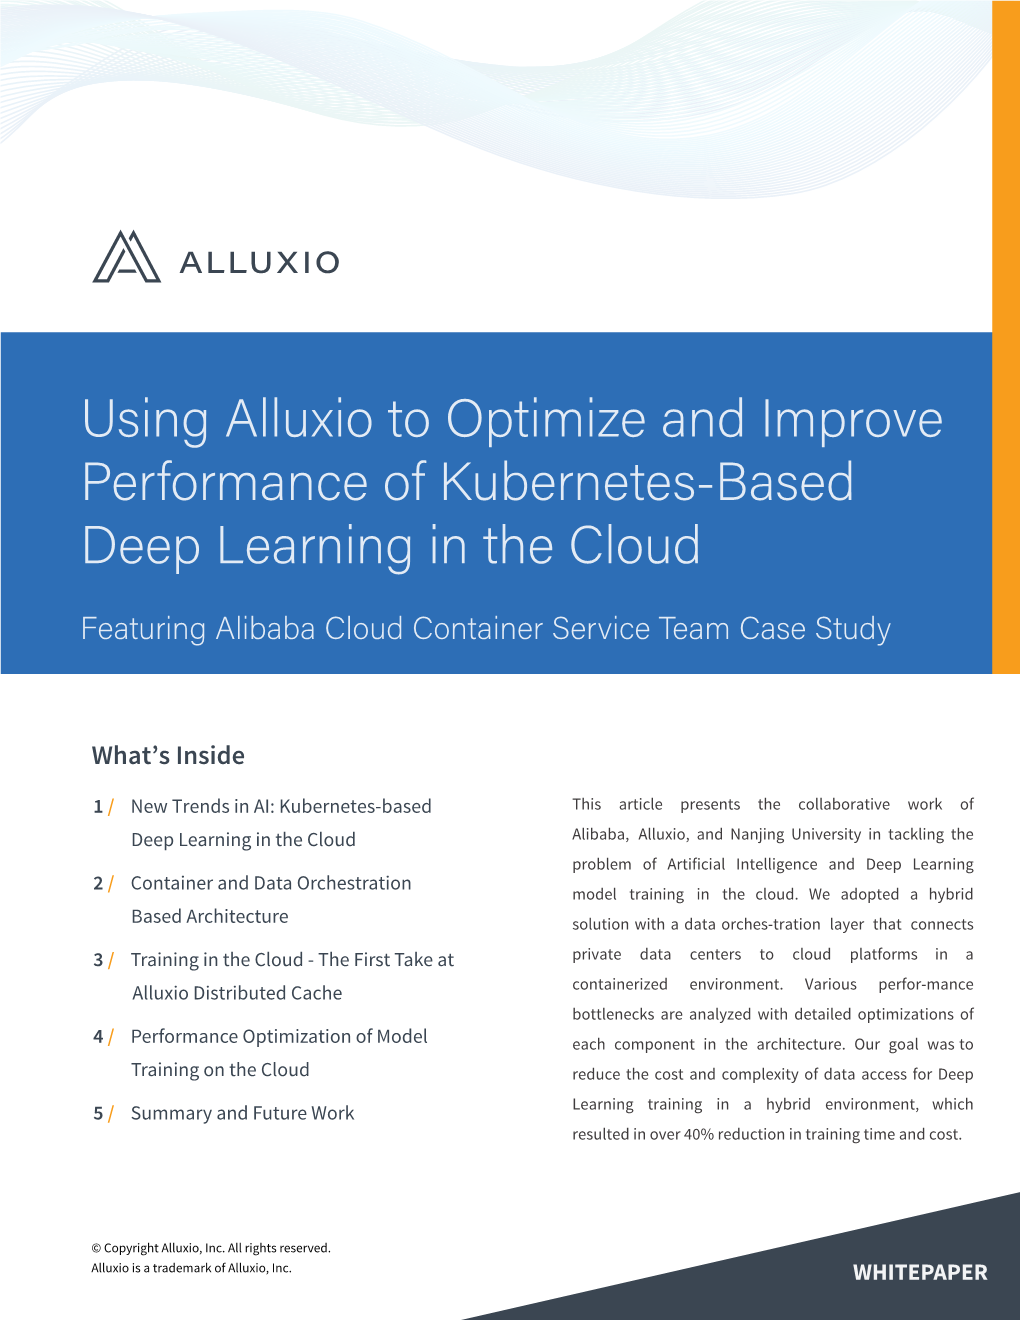 Using Alluxio to Optimize and Improve Performance of Kubernetes-Based Deep Learning in the Cloud